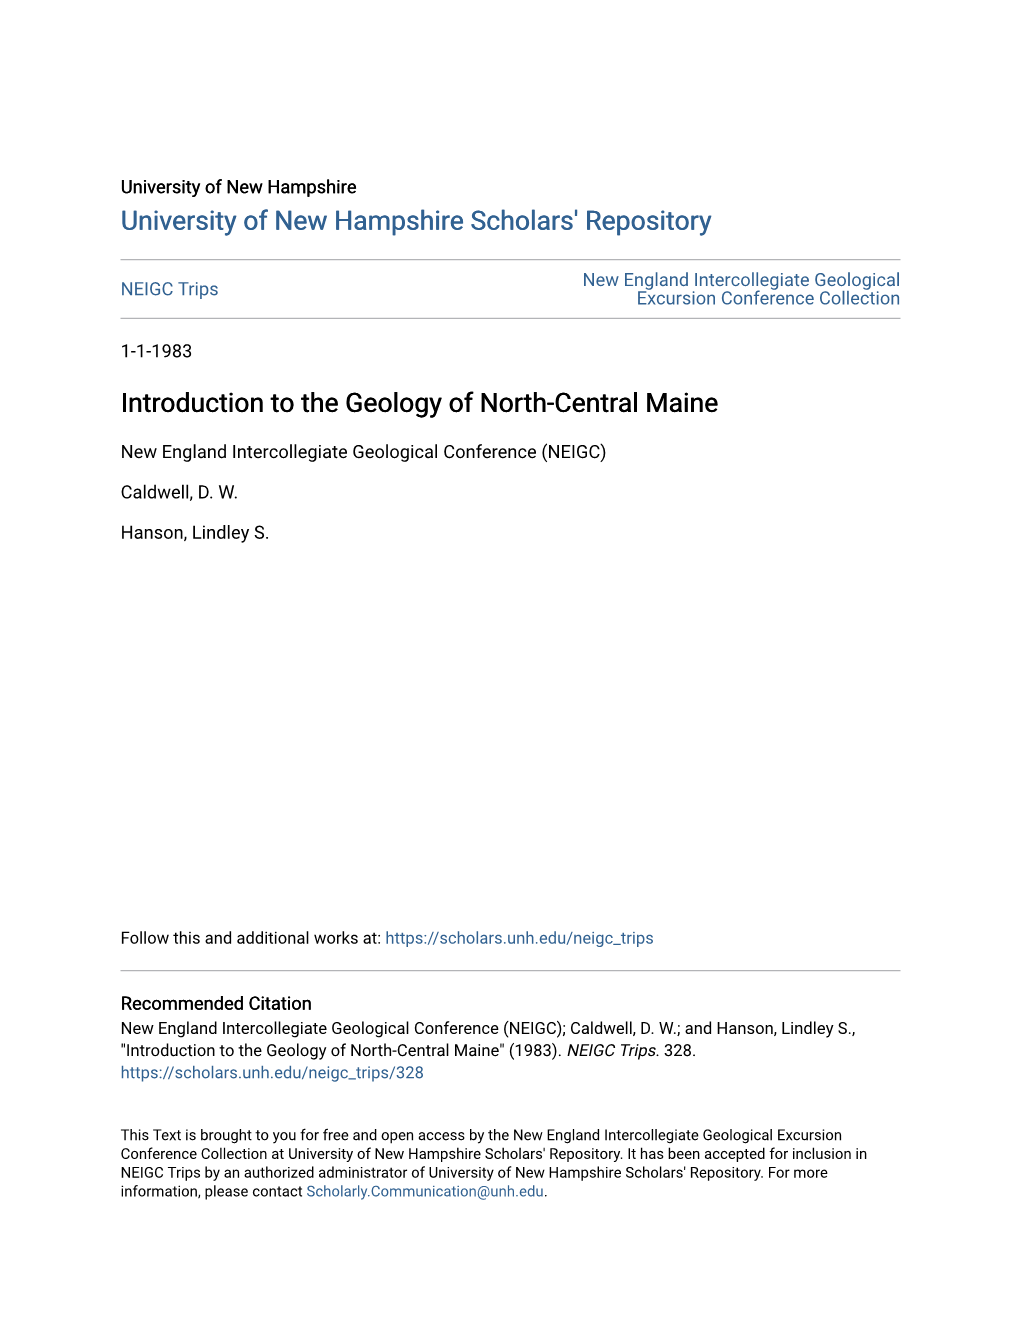 Introduction to the Geology of North-Central Maine